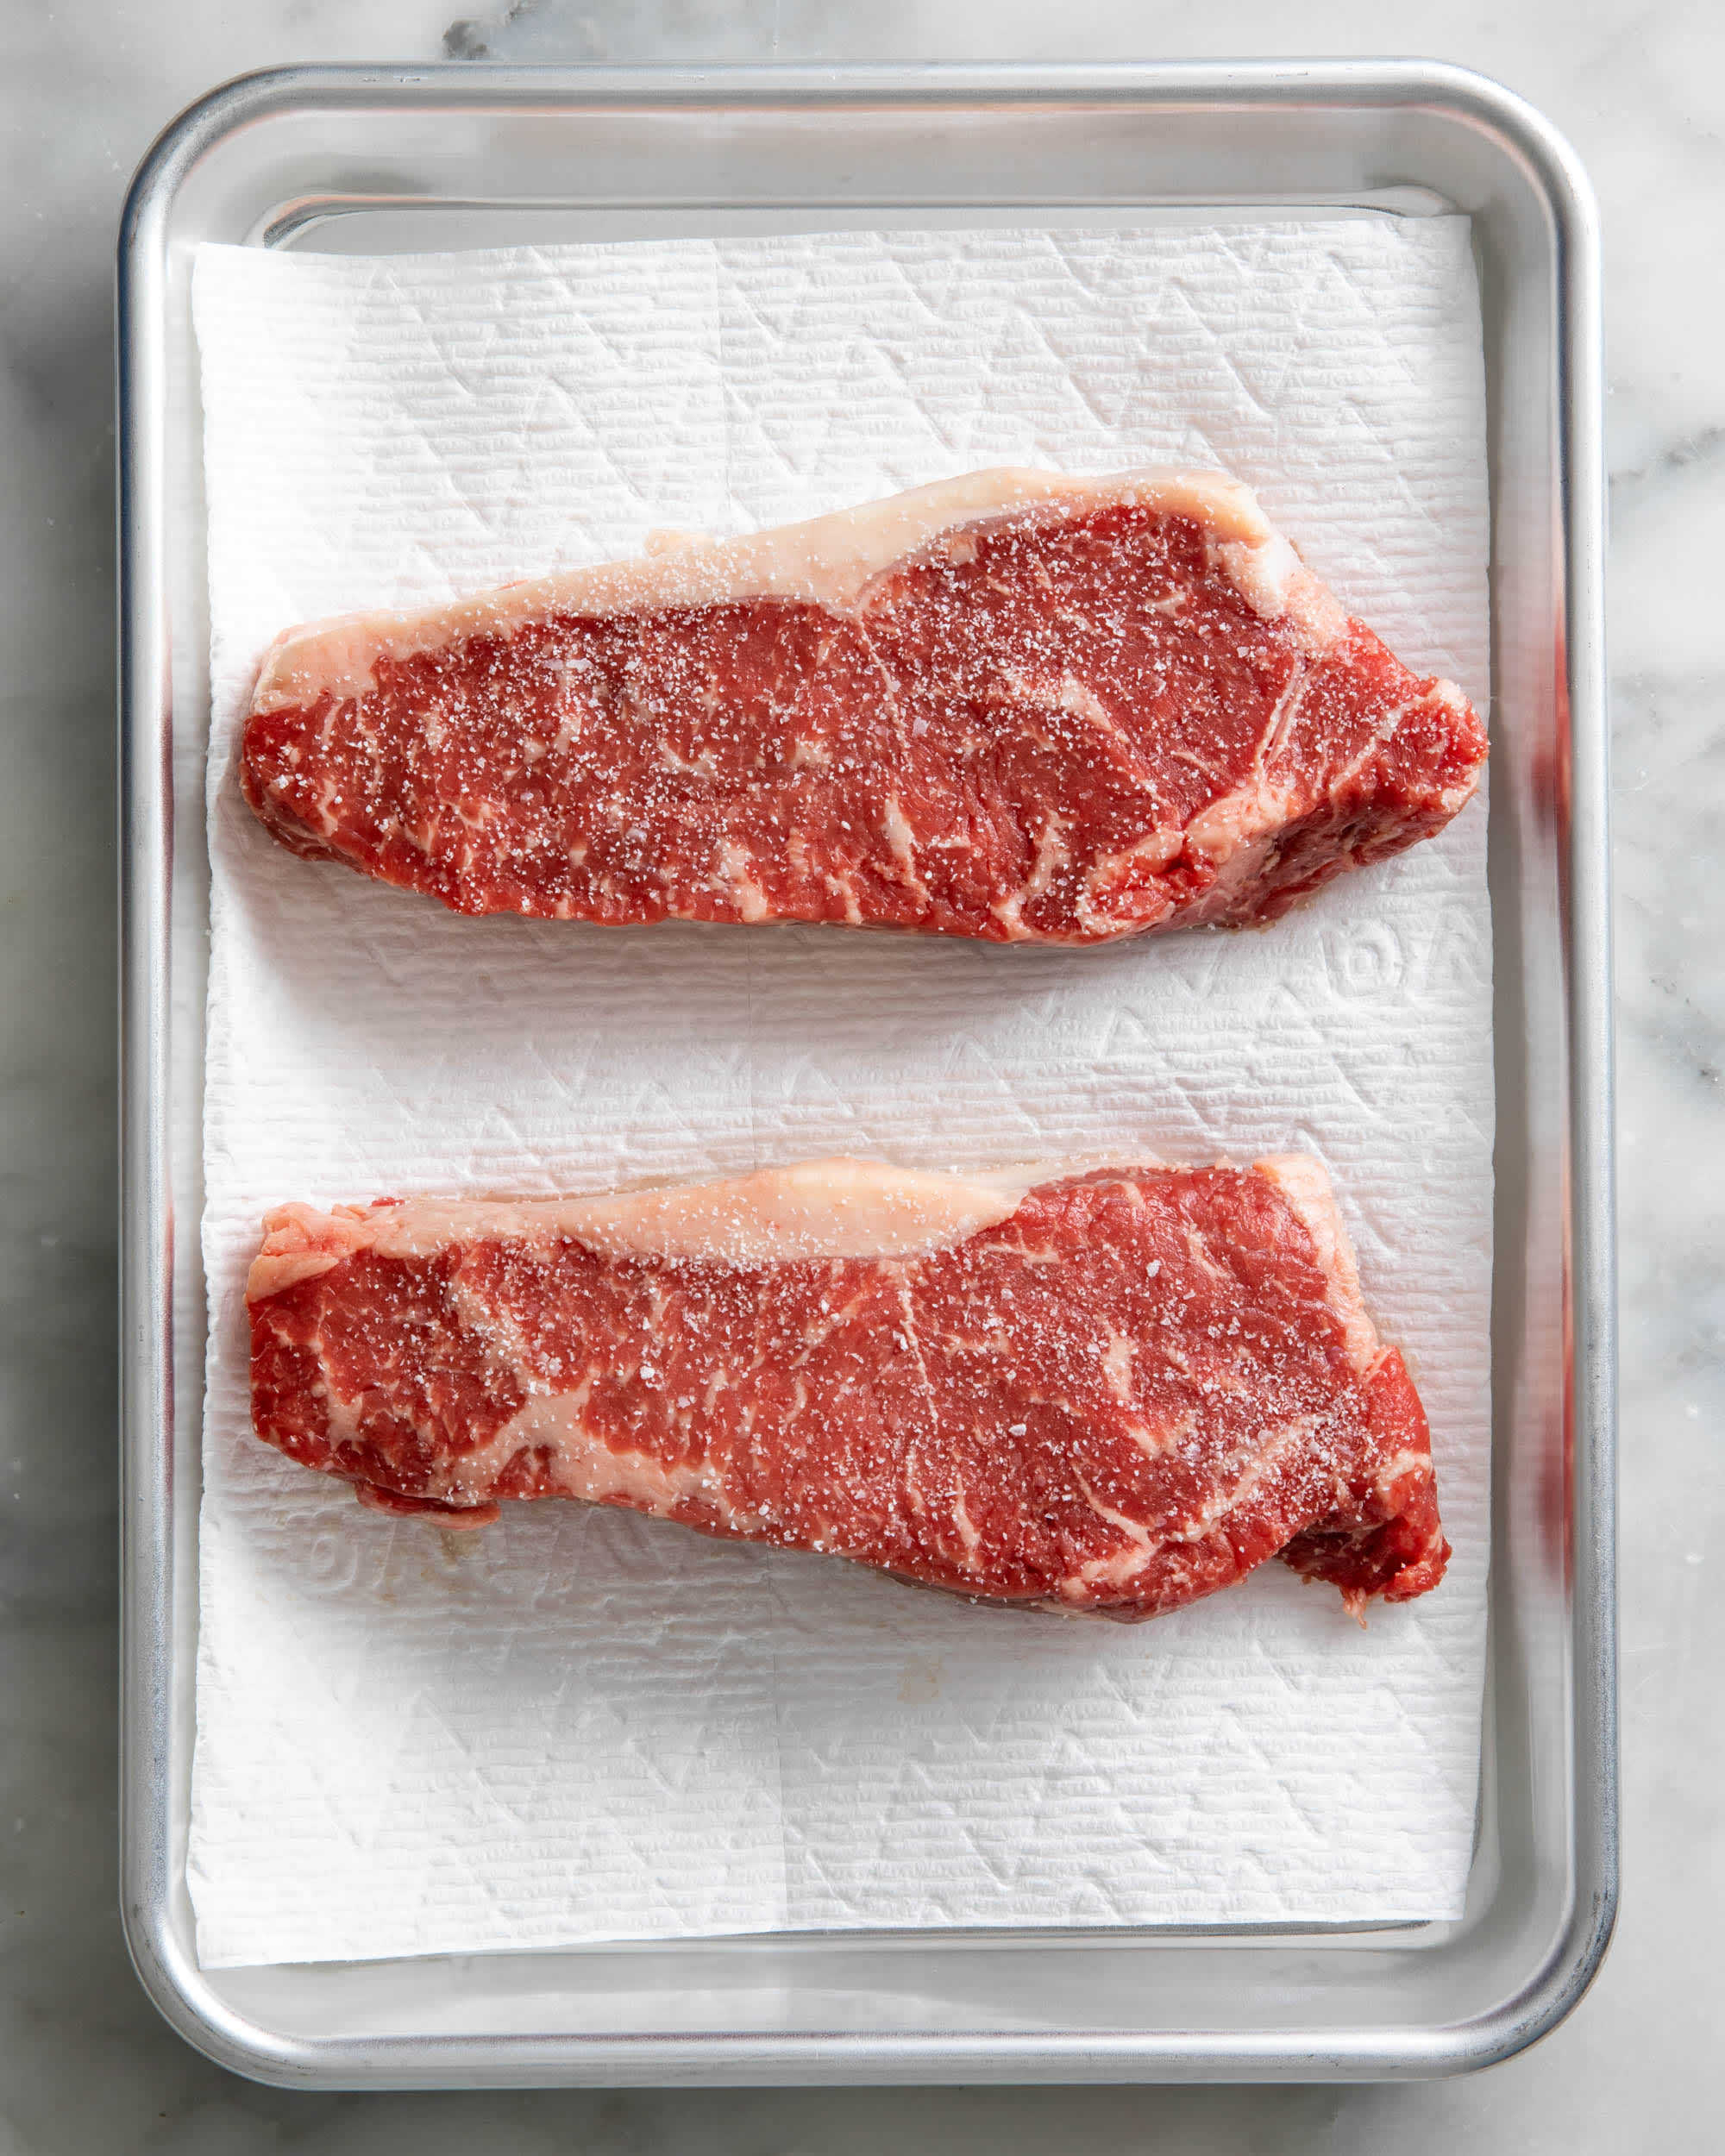 Try The 2-Pan Method For Steak That's Juicy And Perfectly-Crusted Every Time